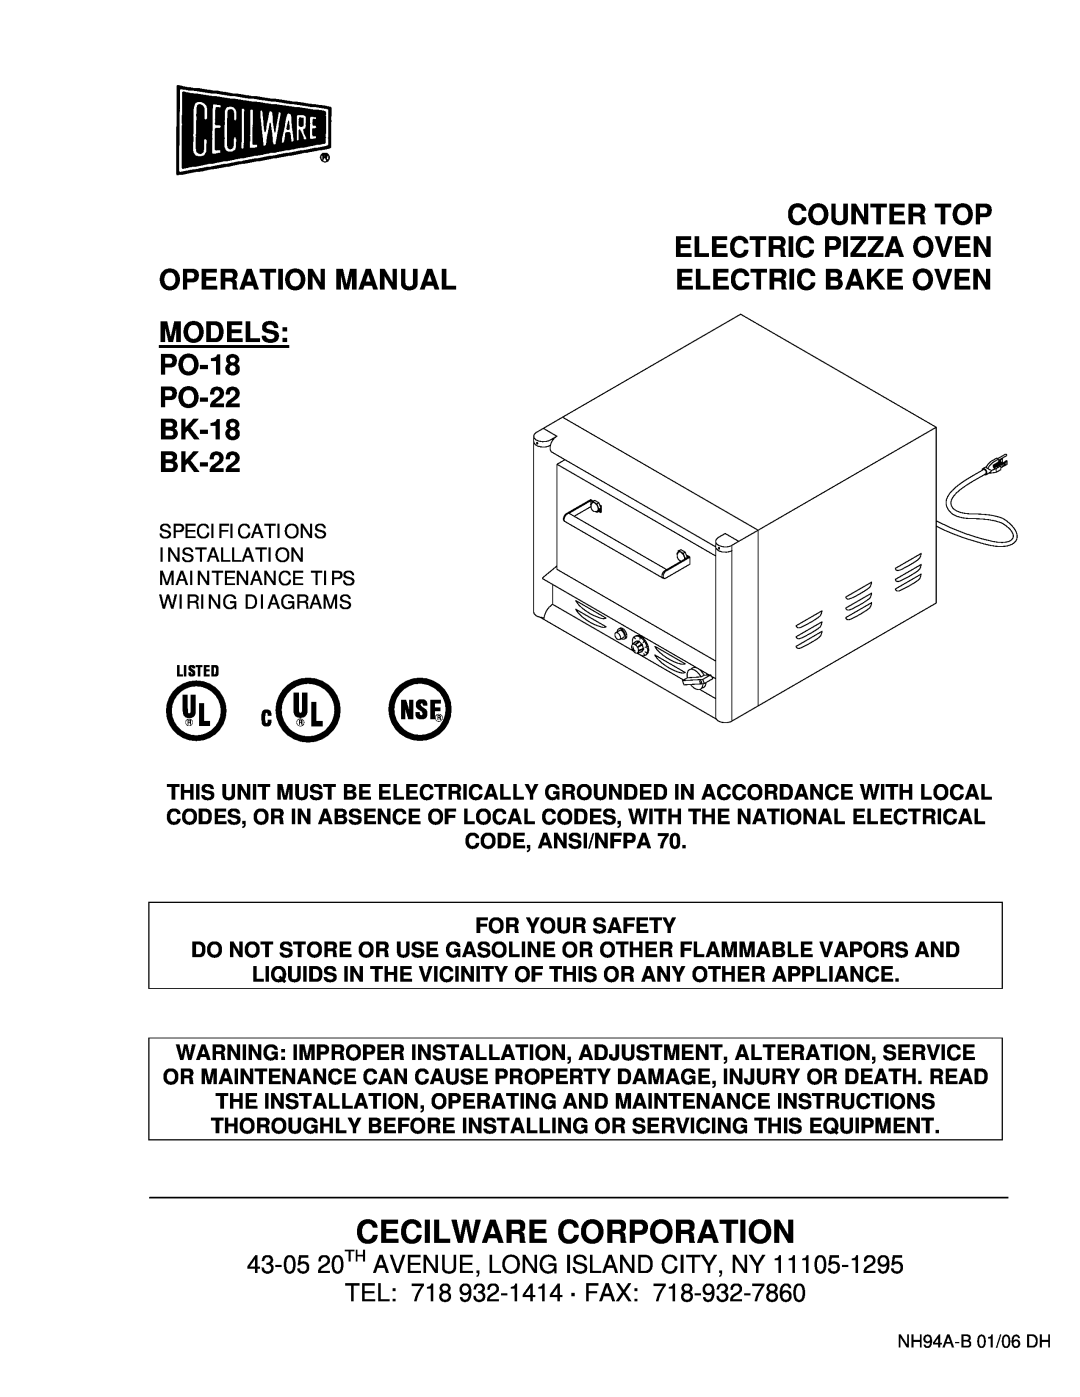 Cecilware BK-18, BK-22 operation manual Cecilware Corporation, Counter Top, Electric Pizza Oven, Electric Bake Oven 